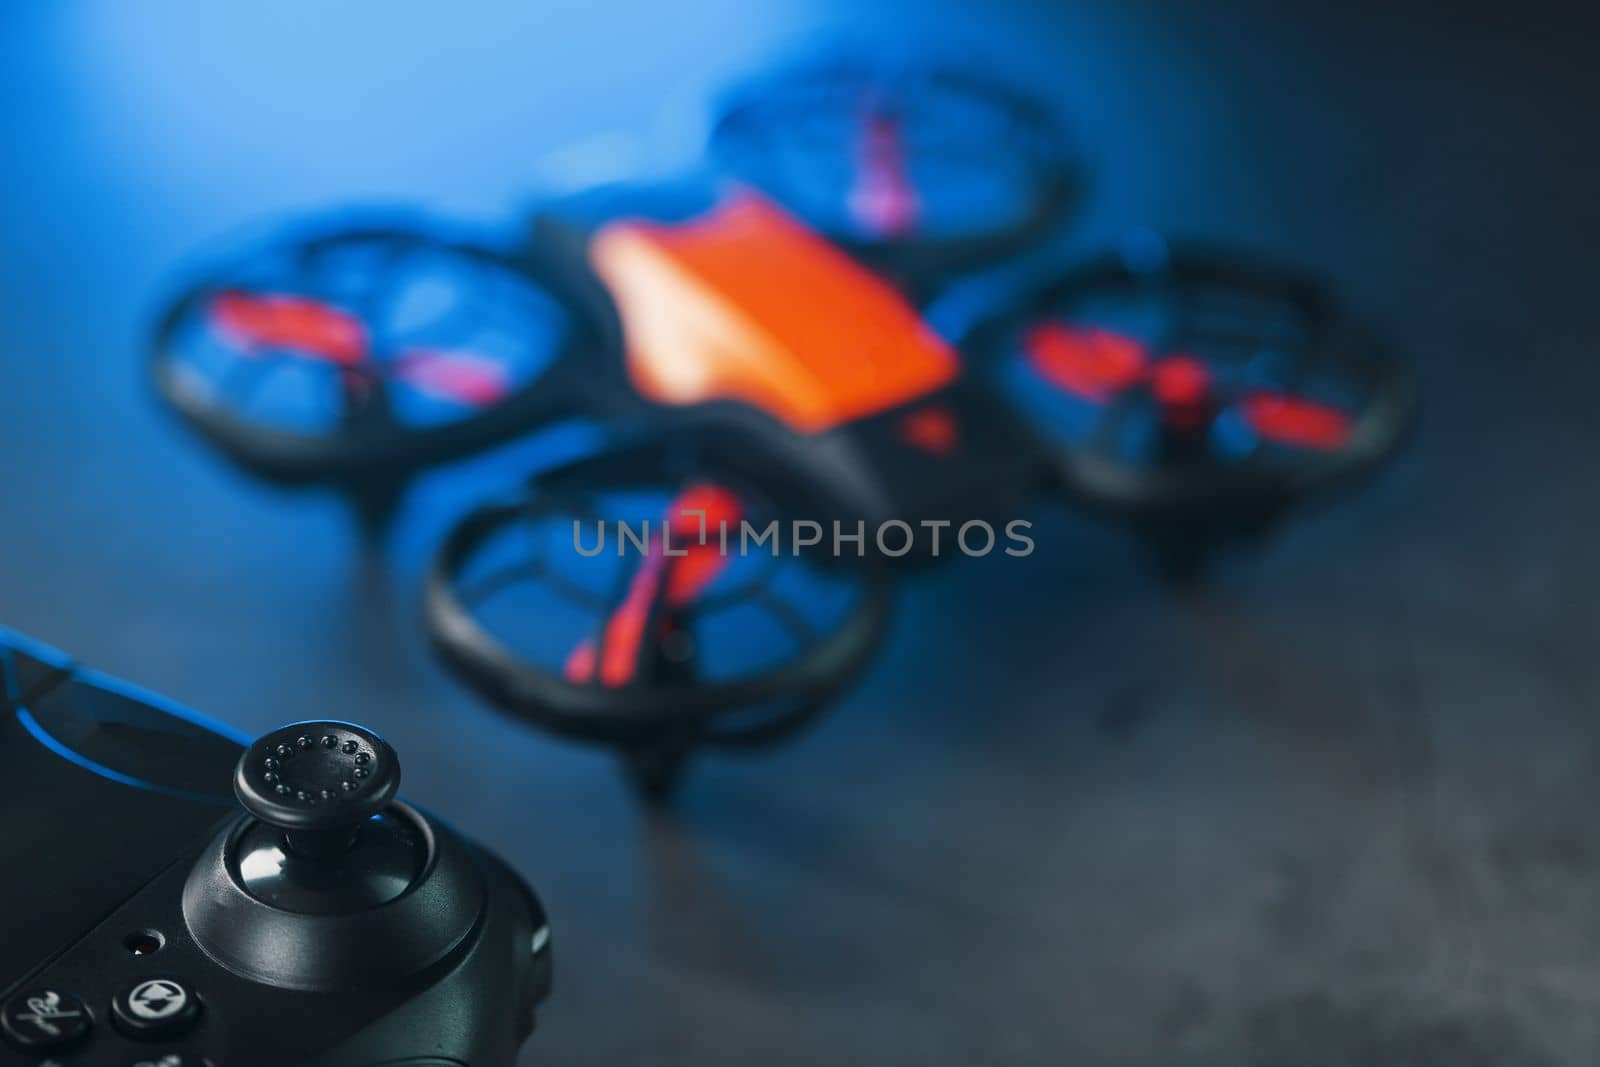 A reconnaissance quadcopter drone with an orange body a by AlexGrec